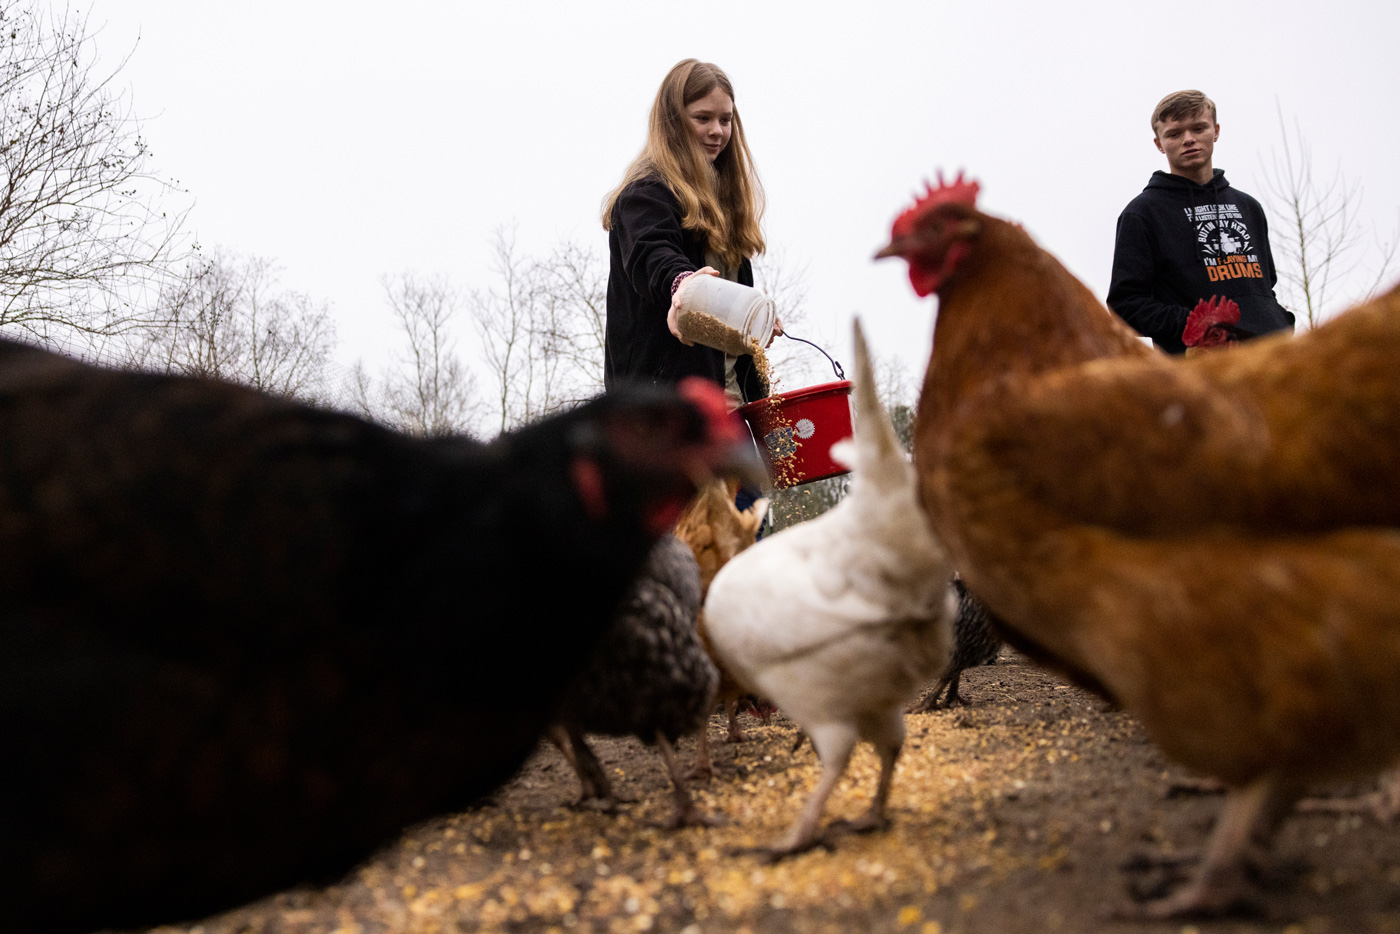 Veronica Clements, 14, and Nicholas Clements, 16, two of five siblings responsible for running Clements Family Farm in Santa Fe, feed their family’s chickens, Jan. 30, 2023. Marie D. De Jesús / Abdelraoufsinno